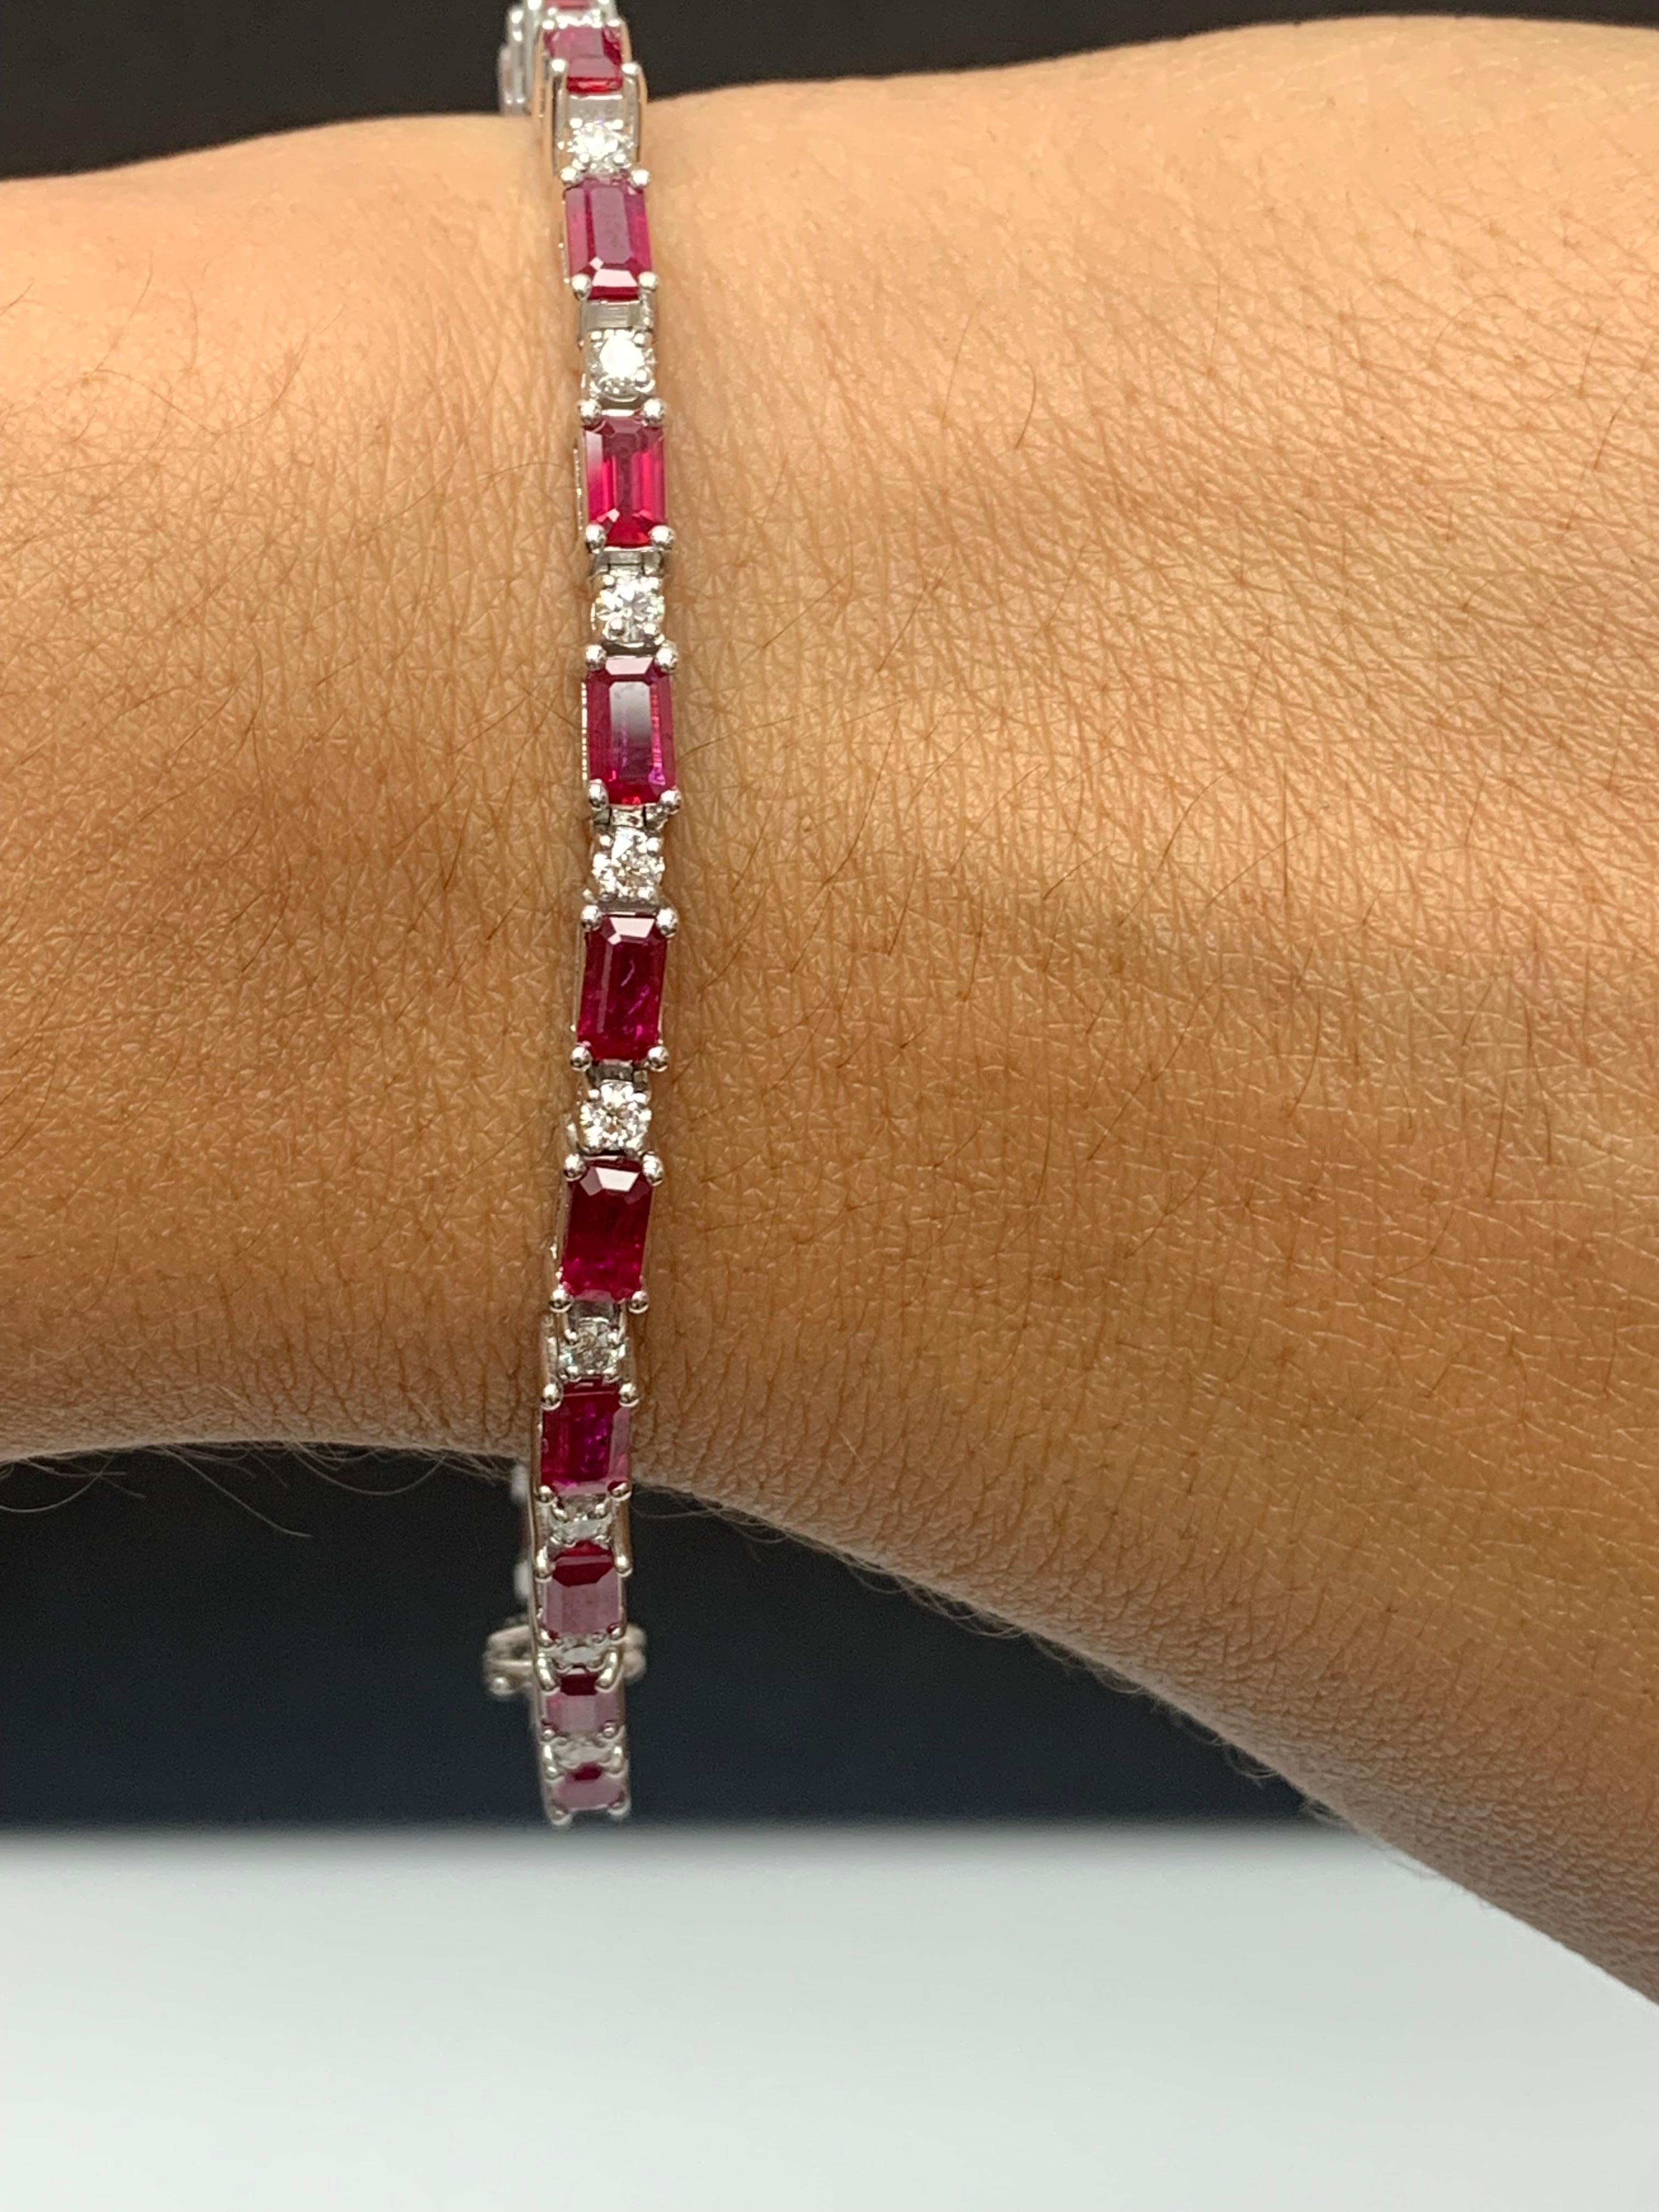 6.20 Carat Emerald Cut Ruby and Diamond Bracelet in 14K White Gold For Sale 4